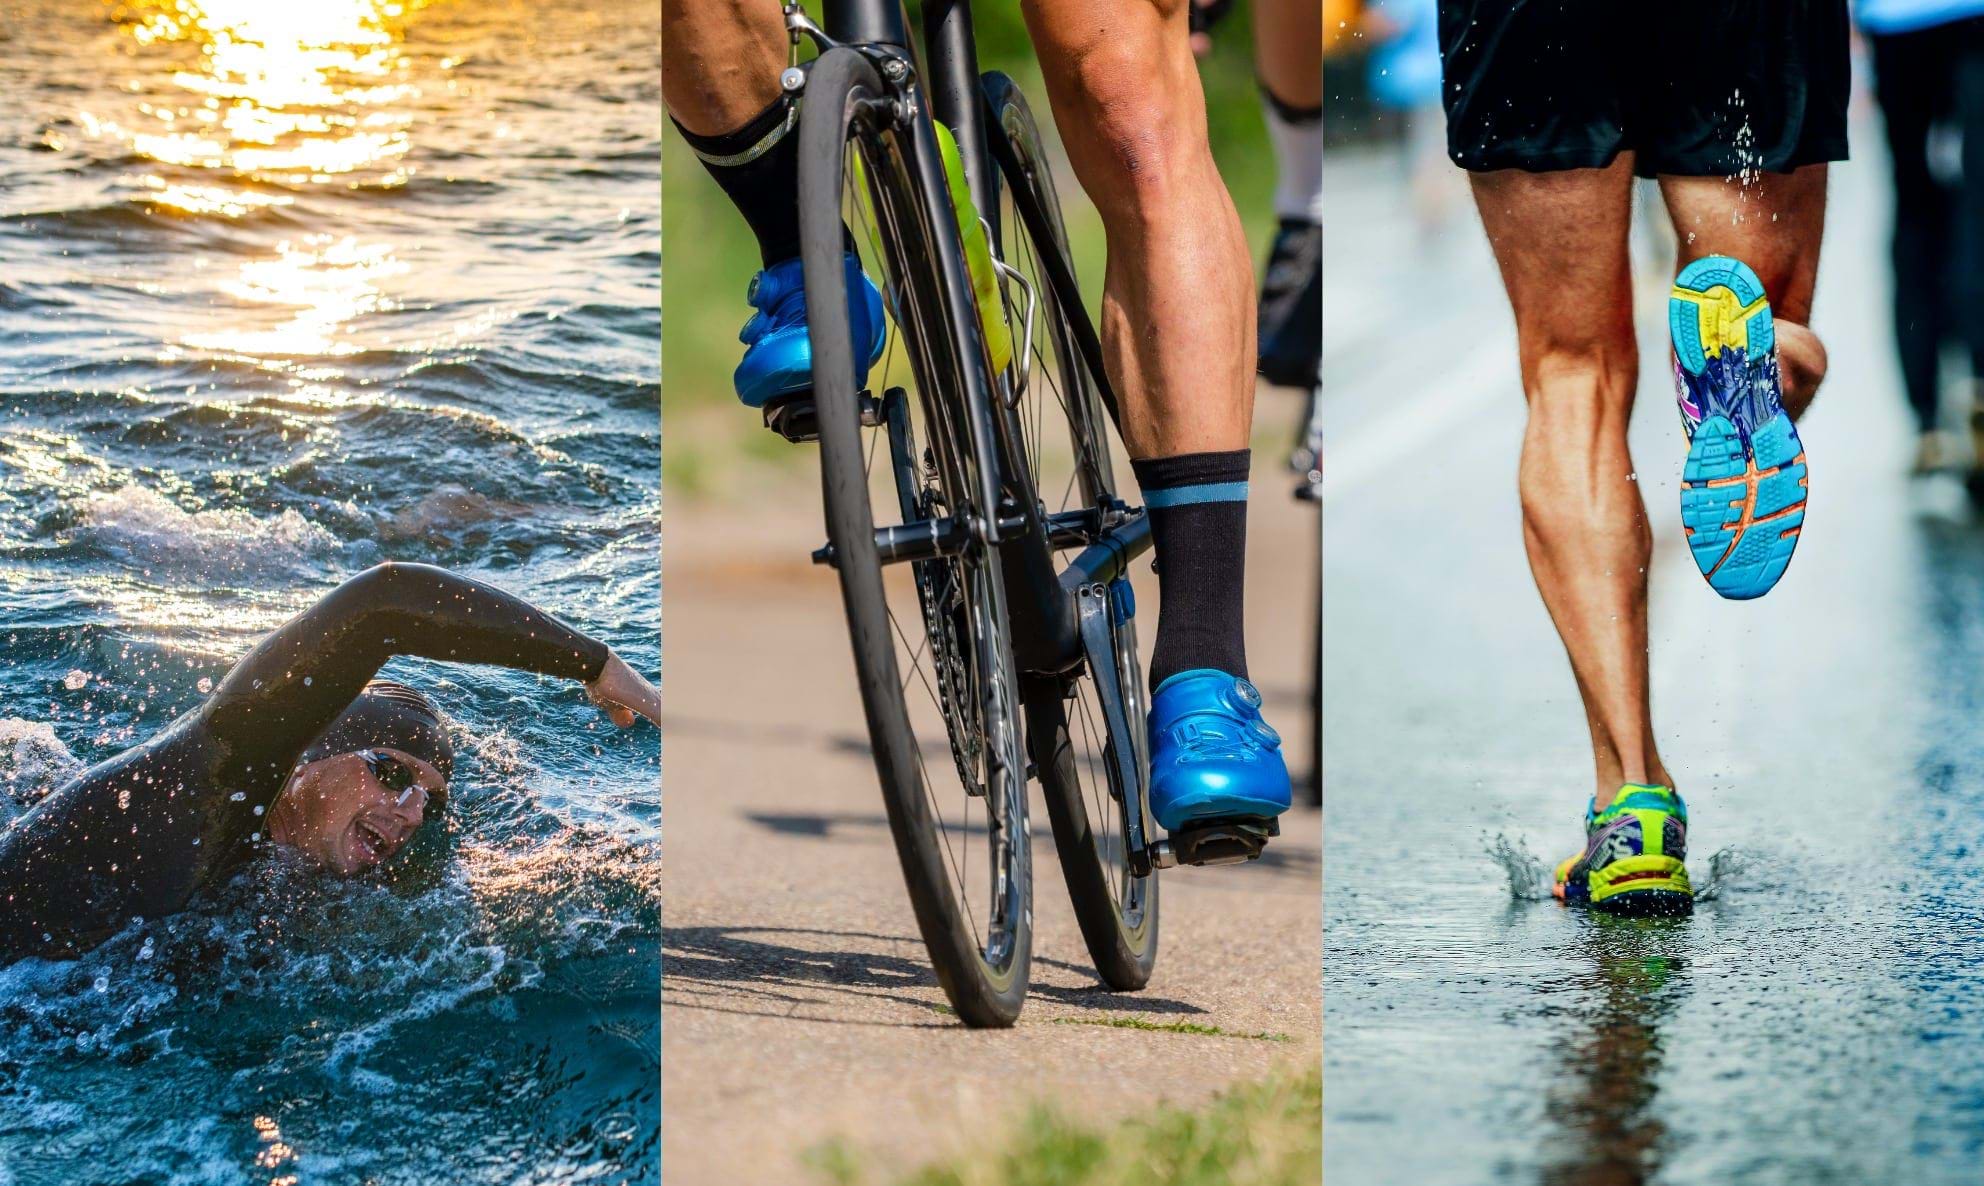 Jogging, Swimming, And Biking Are Examples Of What Type Of Exercise?